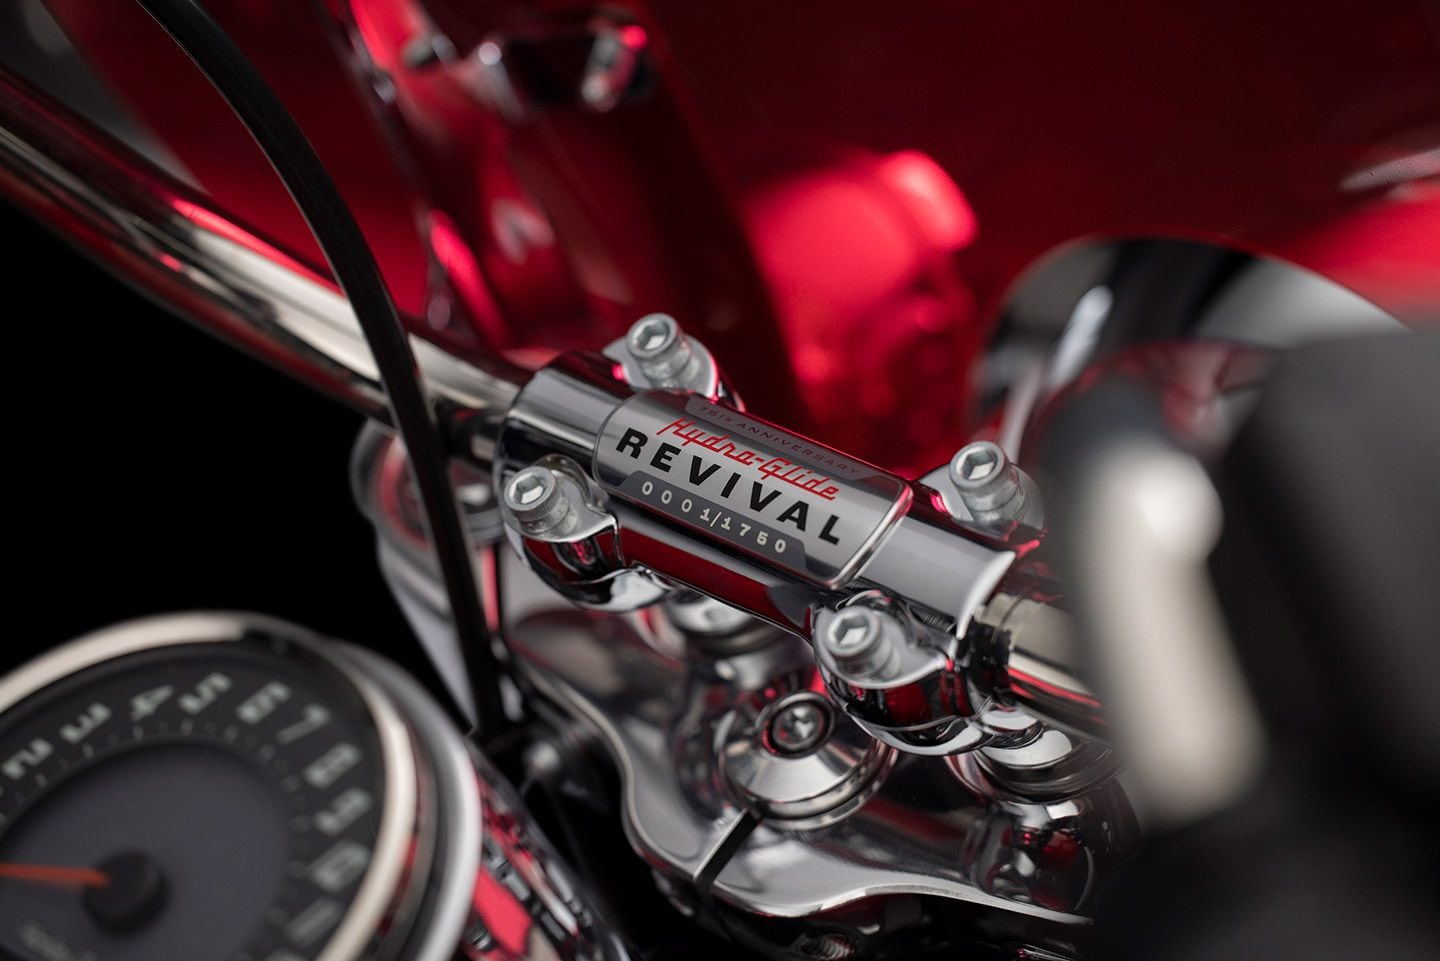 The serialized “Hydra-Glide Revival” insert on the handlebar riser cap and Icons Motorcycle Collection graphic on the rear fender identify this as a limited-production model.